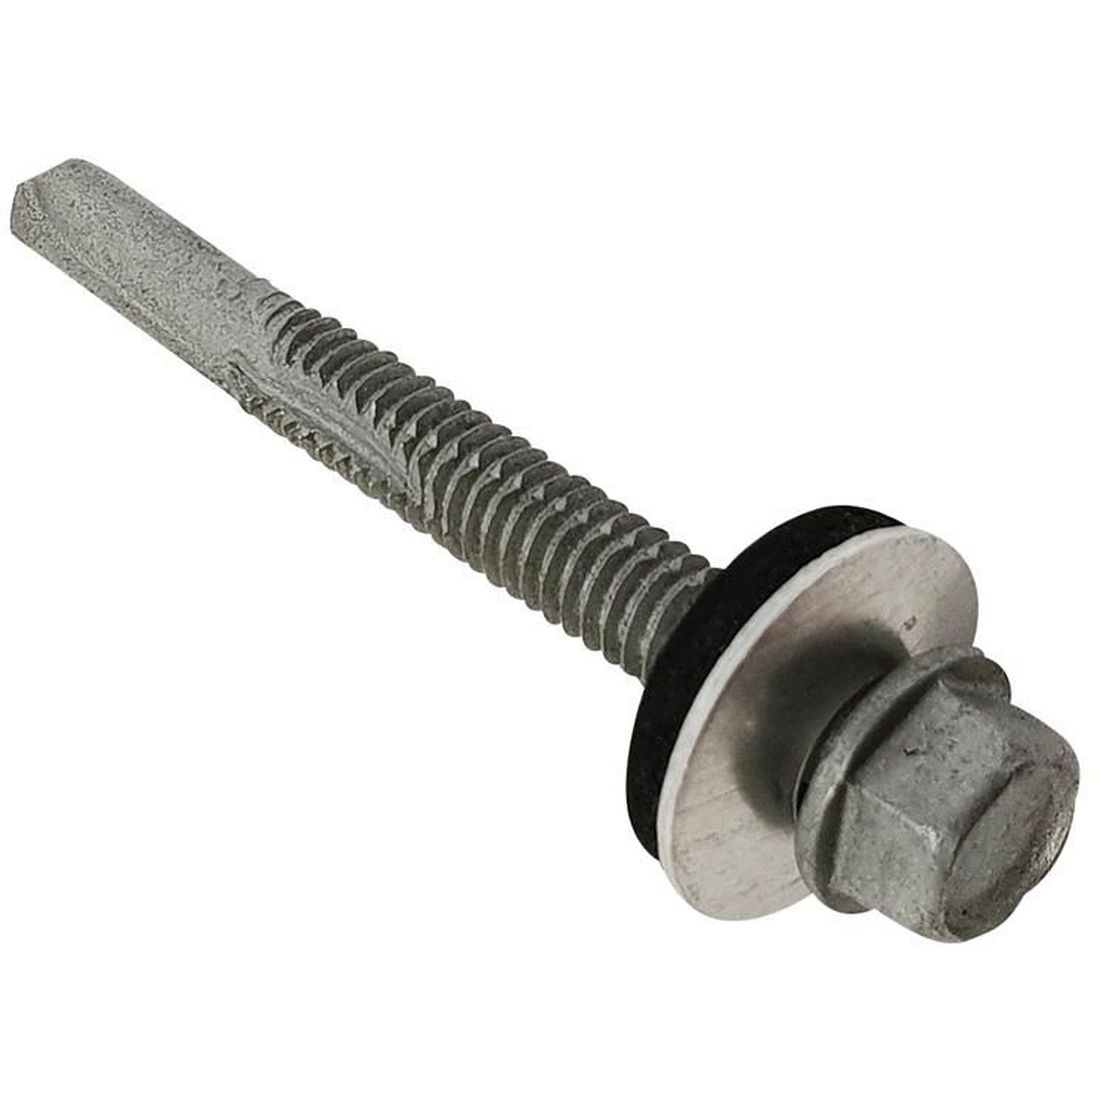 ForgeFix TechFast Roofing Sheet to Steel Hex Screw & Washer No.5 Tip 5.5 x 65mm Box 100  